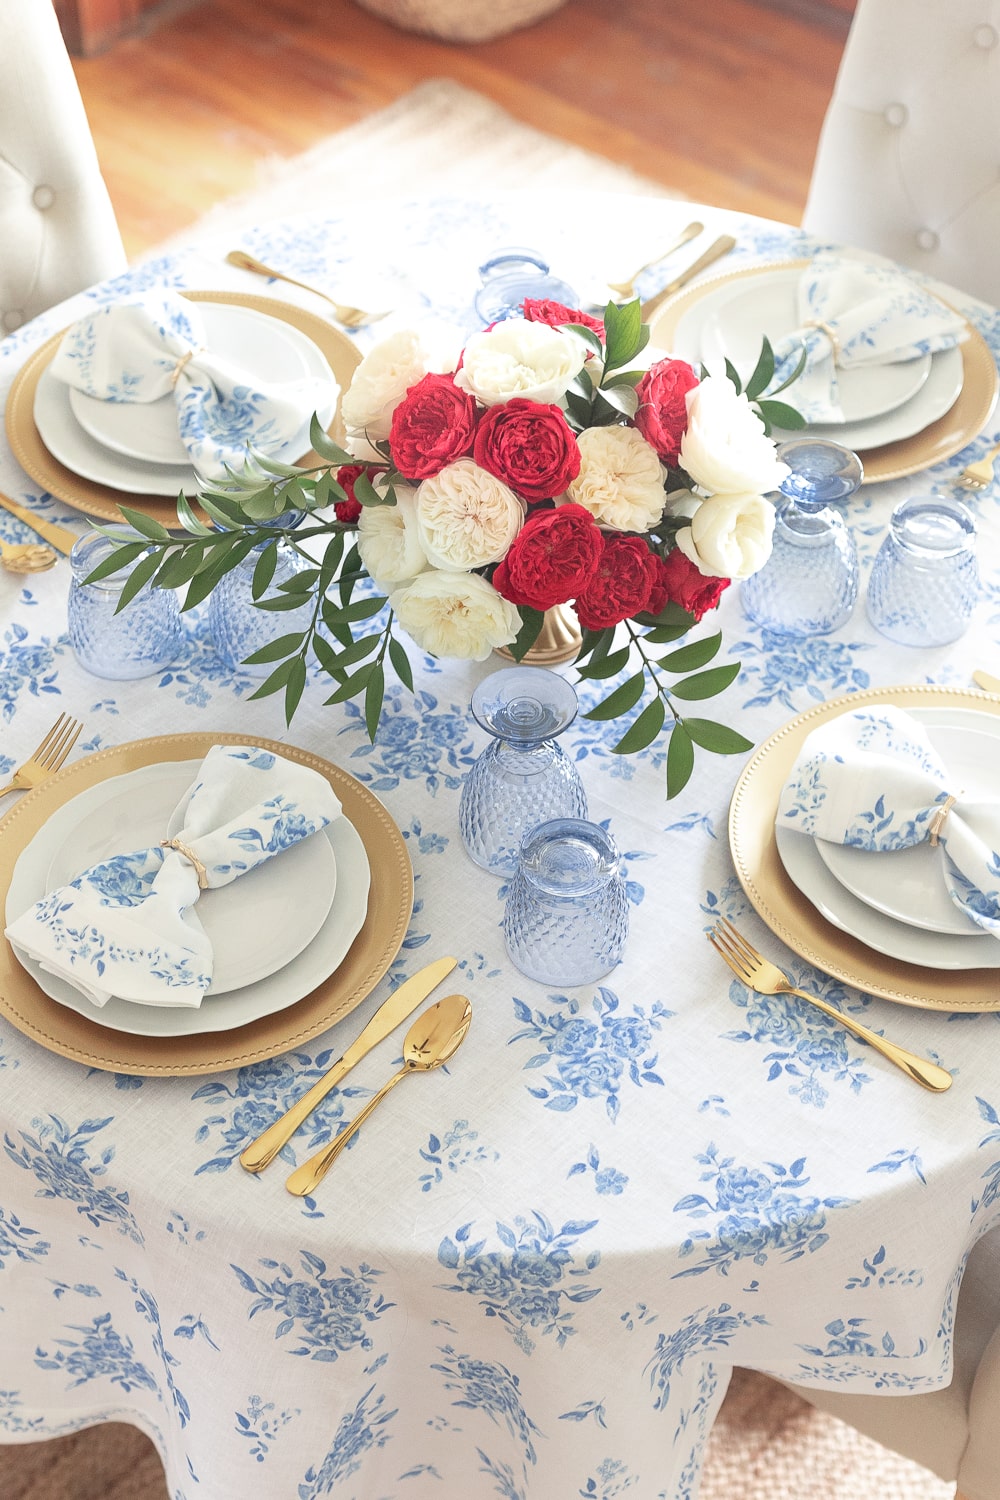 4th of july table settings designed by blogger Stephanie Ziajka on Diary of a Debutante